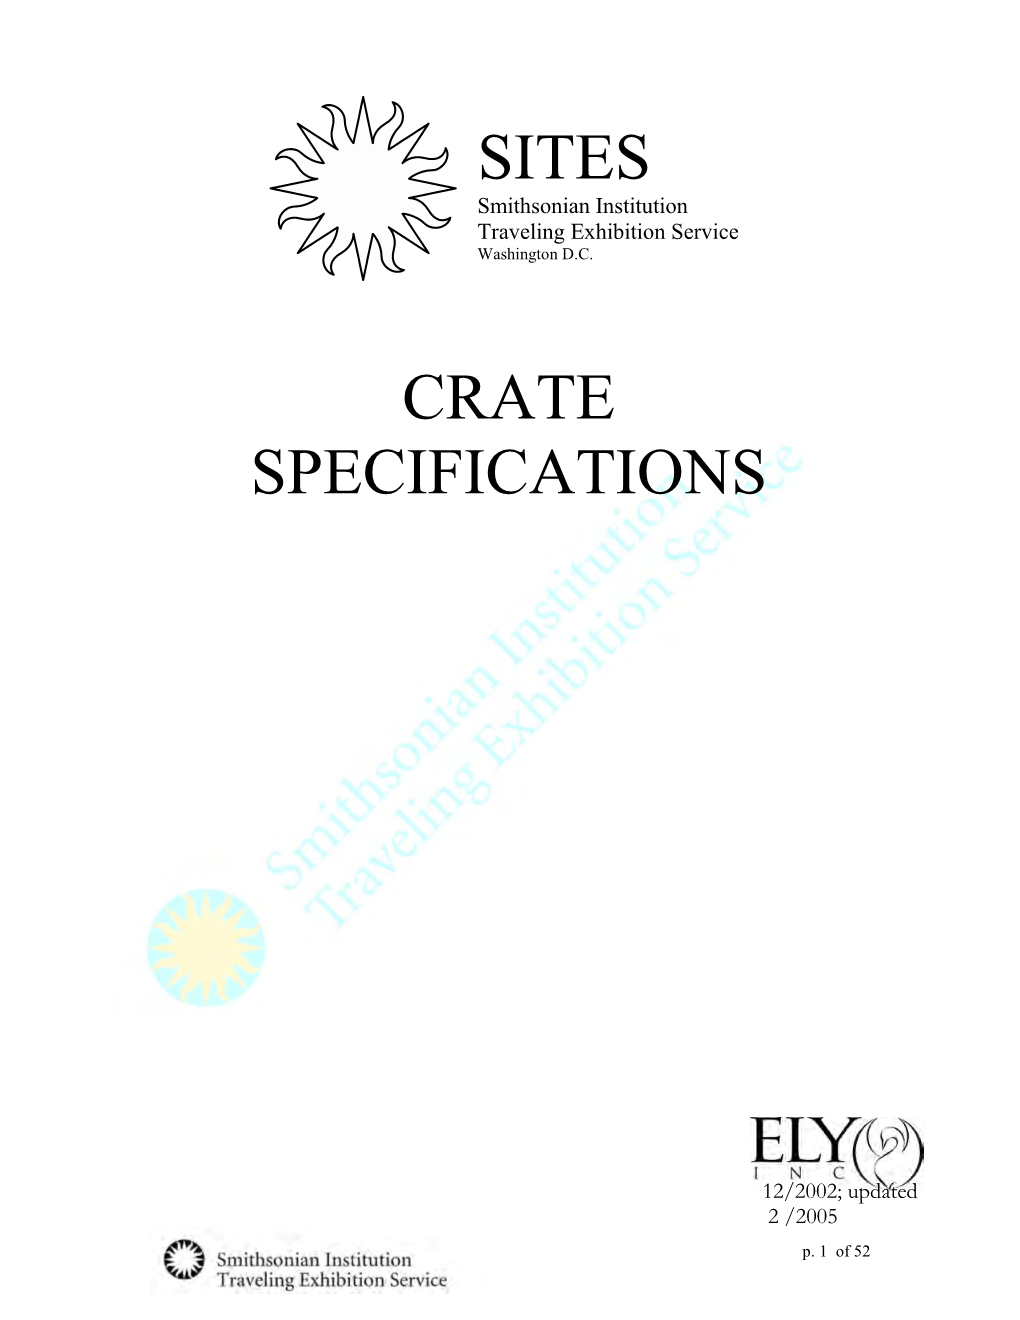 Download SITES Crate Specifications